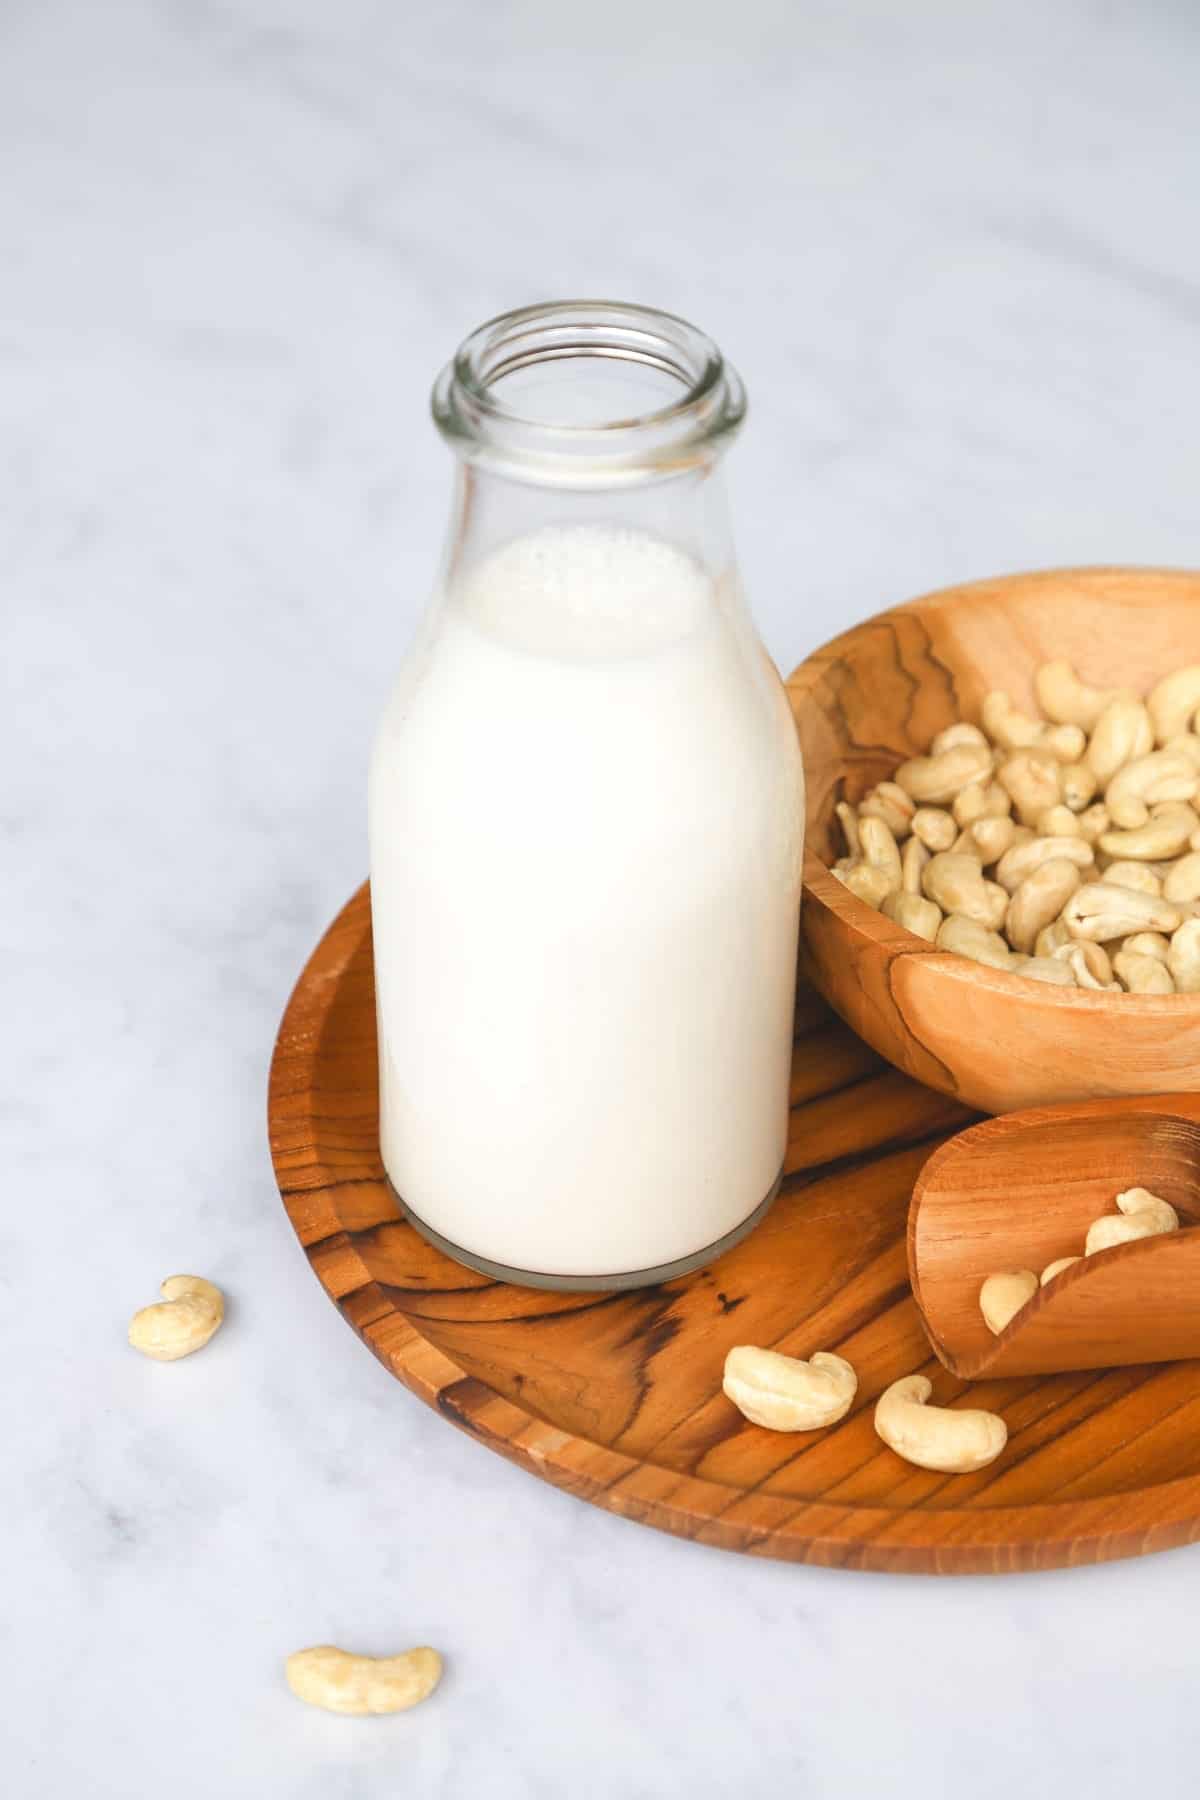 Homemade cashew milk in a small glass bottle, on a wooden tray, with some cashew nuts scattered on the tray